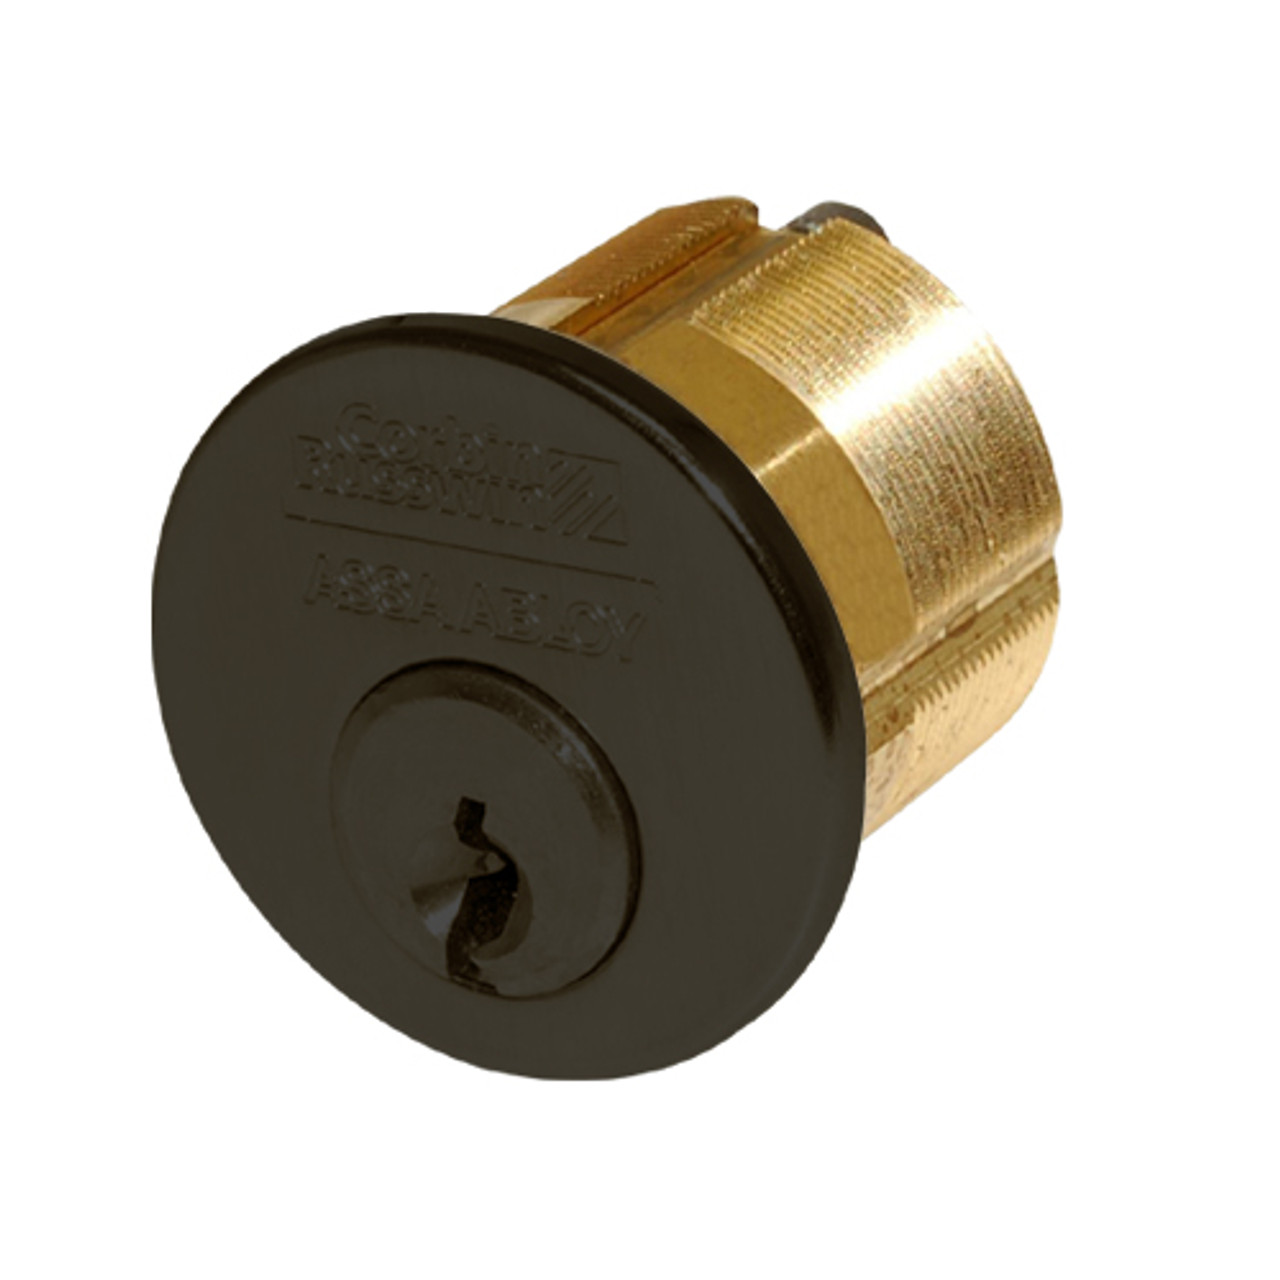 CR1000-134-A01-6-57A1-613 Corbin Conventional Mortise Cylinder for Mortise Lock and DL3000 Deadlocks with Cloverleaf Cam in Oil Rubbed Bronze Finish